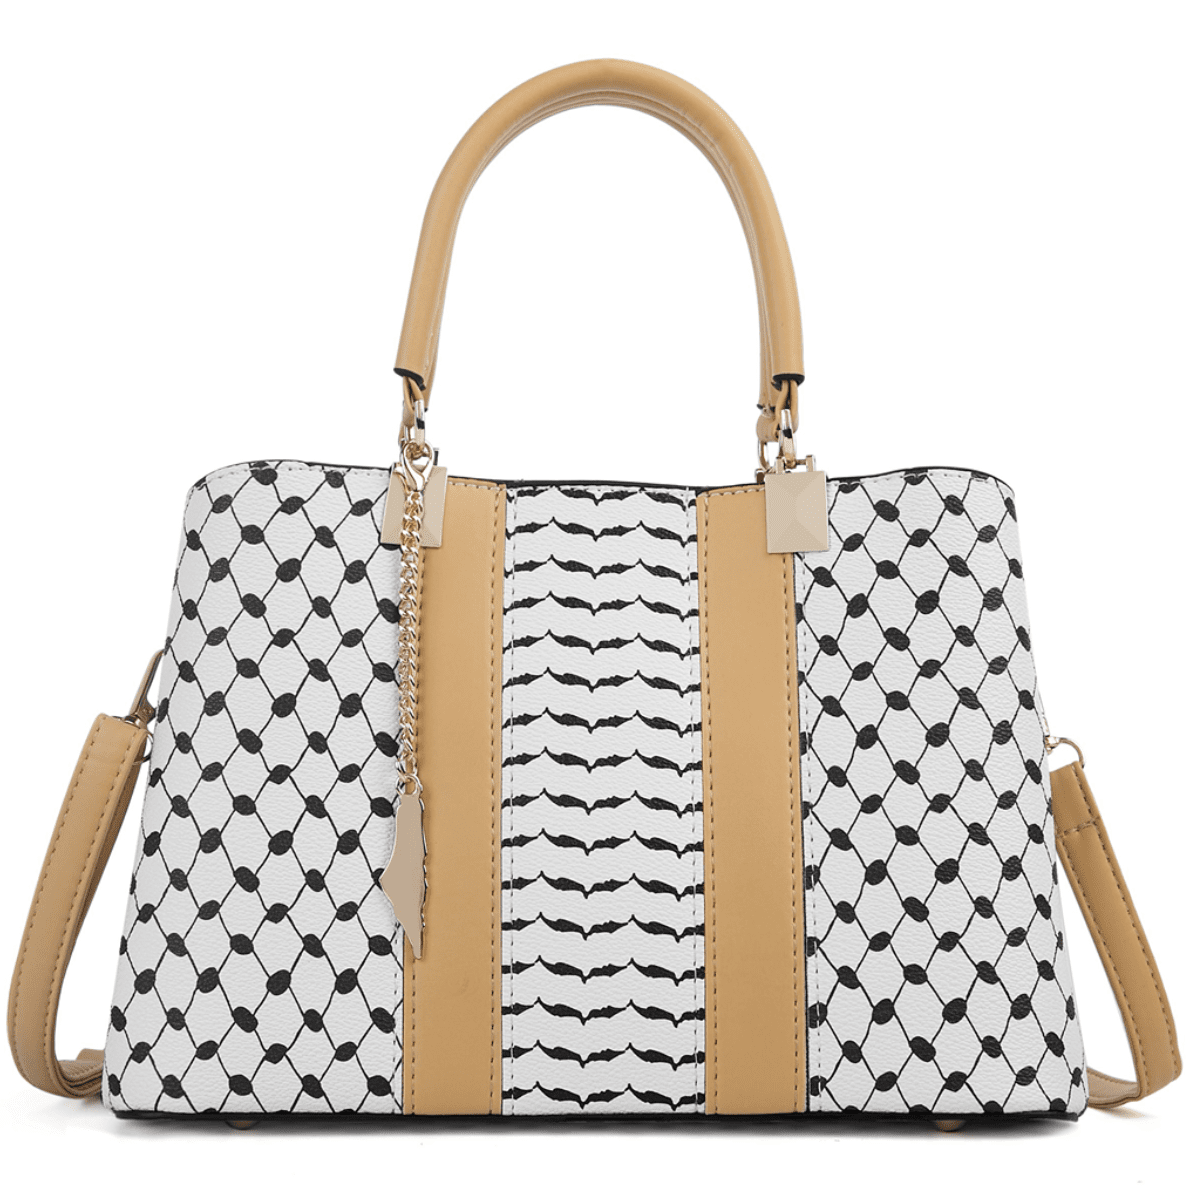 Exclusive Handbag Inspired by the Keffiyeh – A Symbol of Heritage and Style